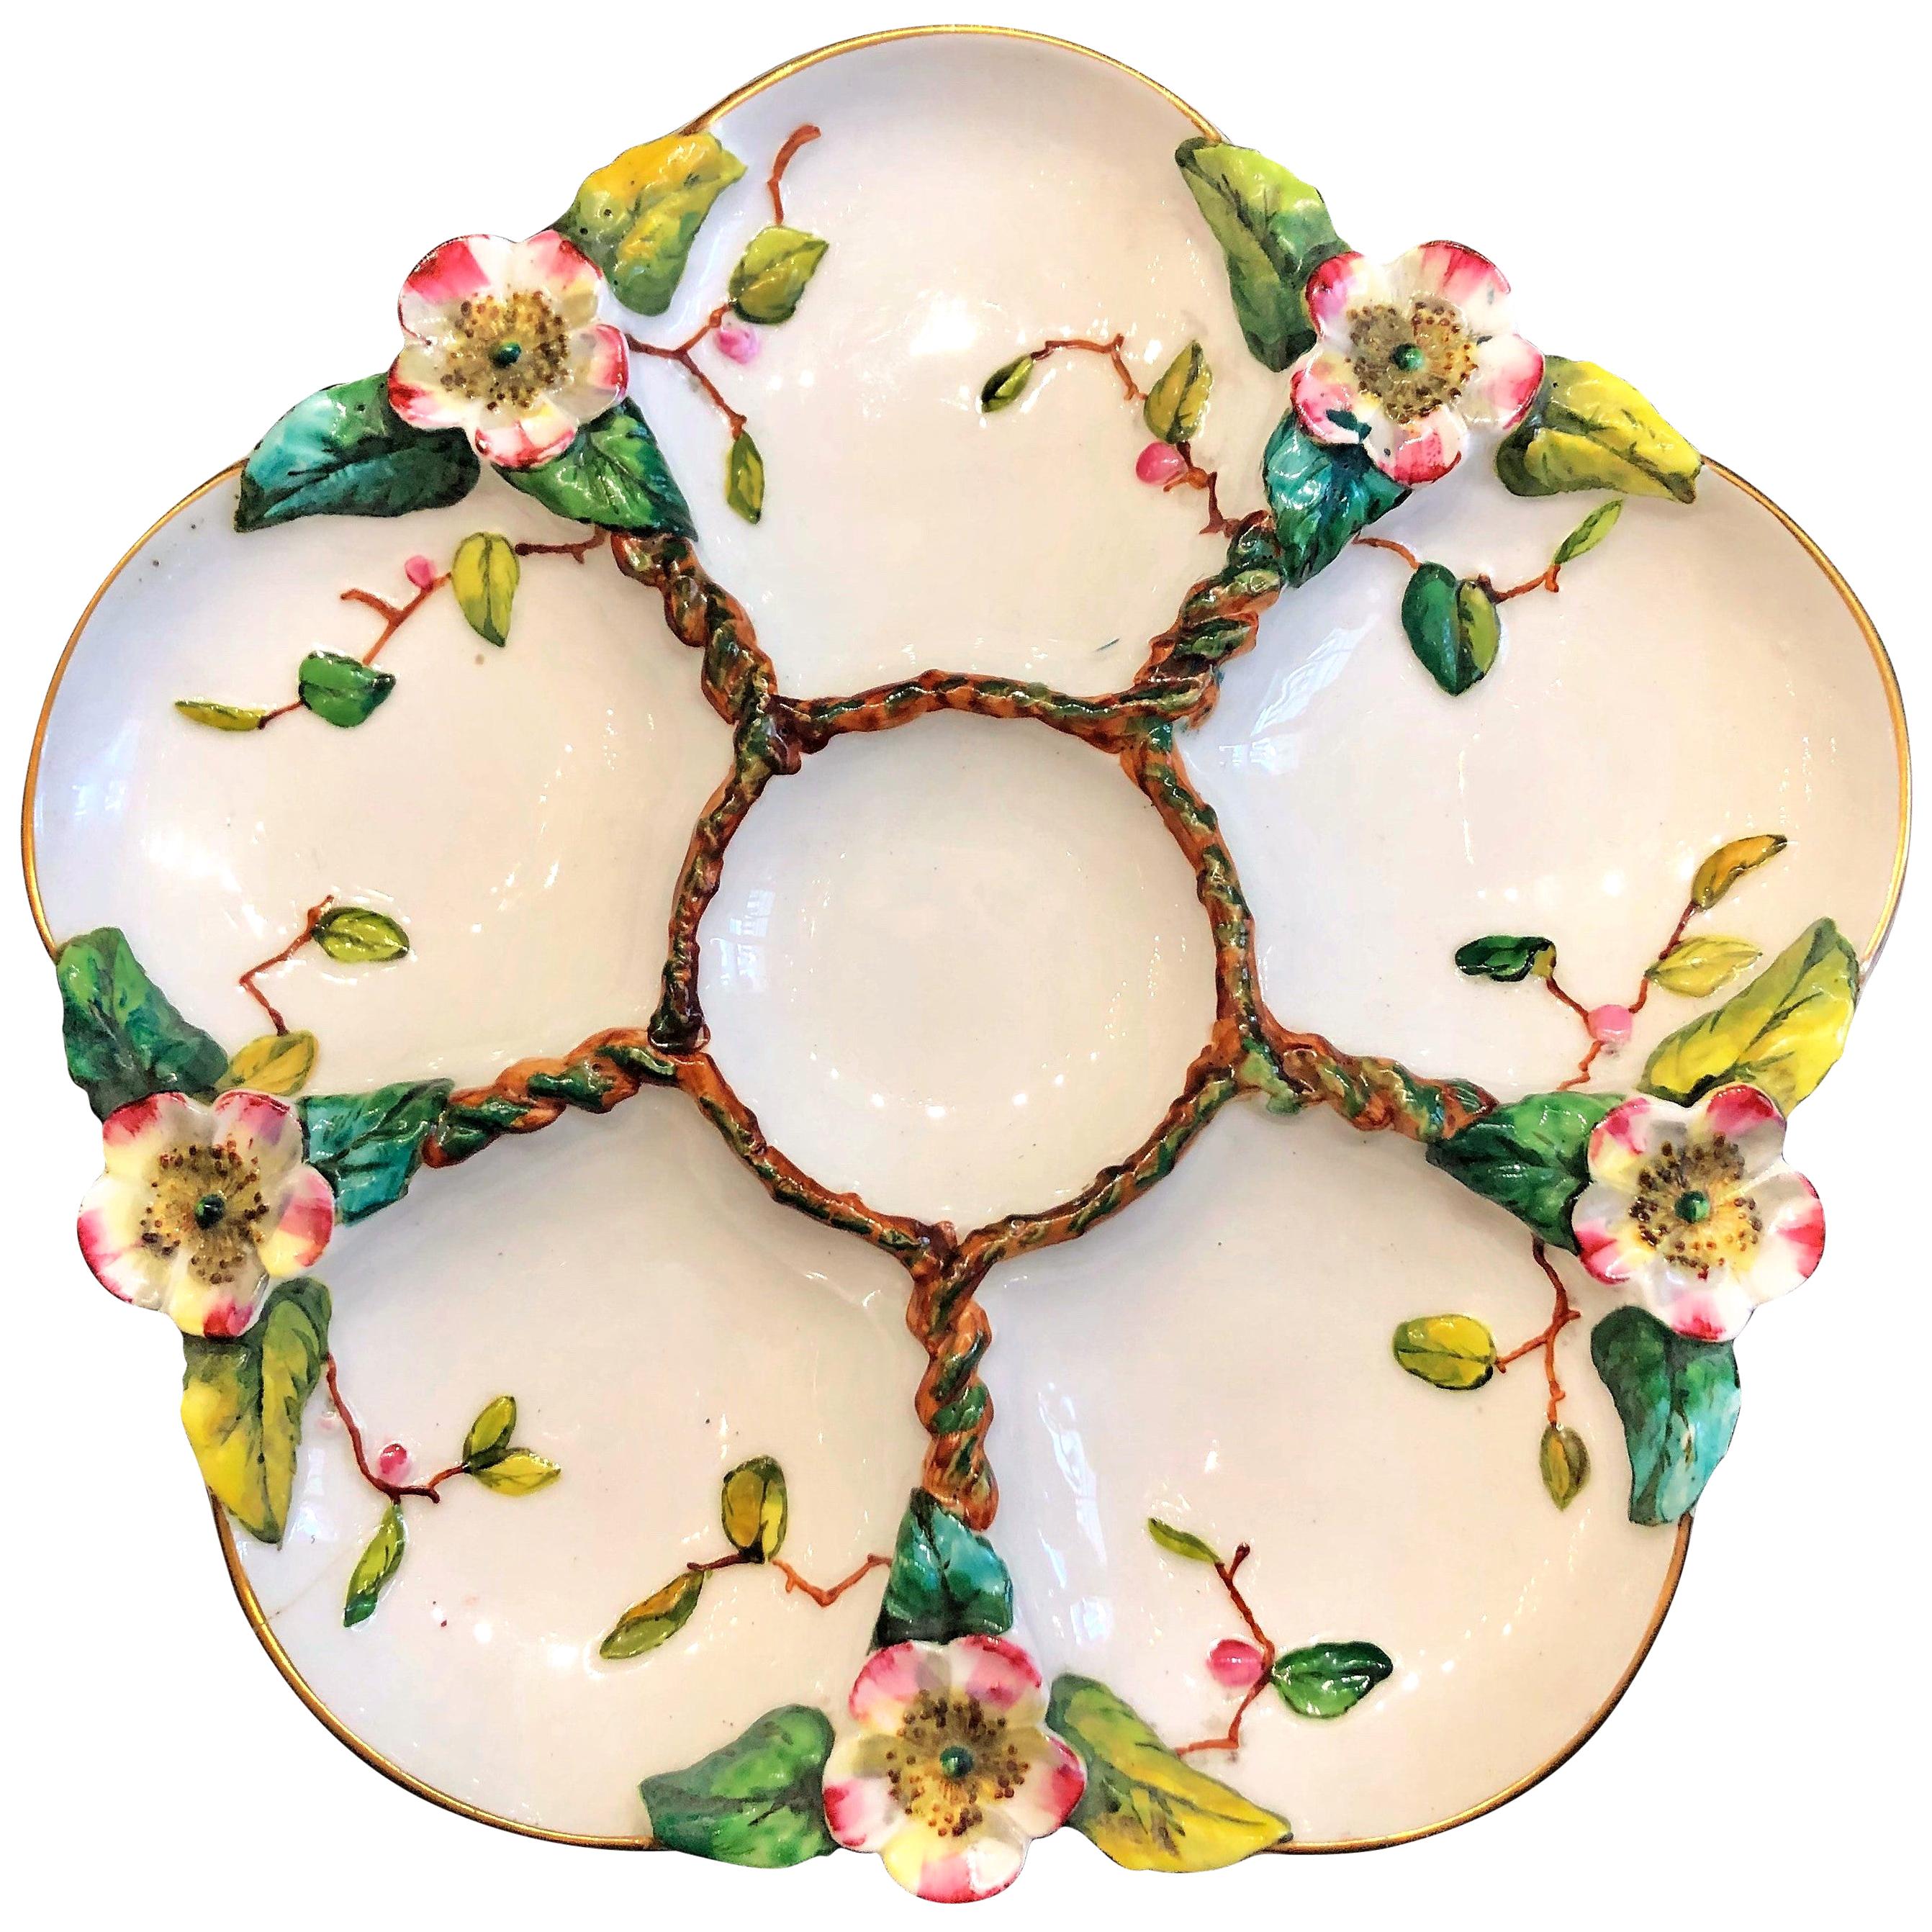 Antique English Hand Painted Majolica Porcelain Oyster Plate, circa 1900-1910.